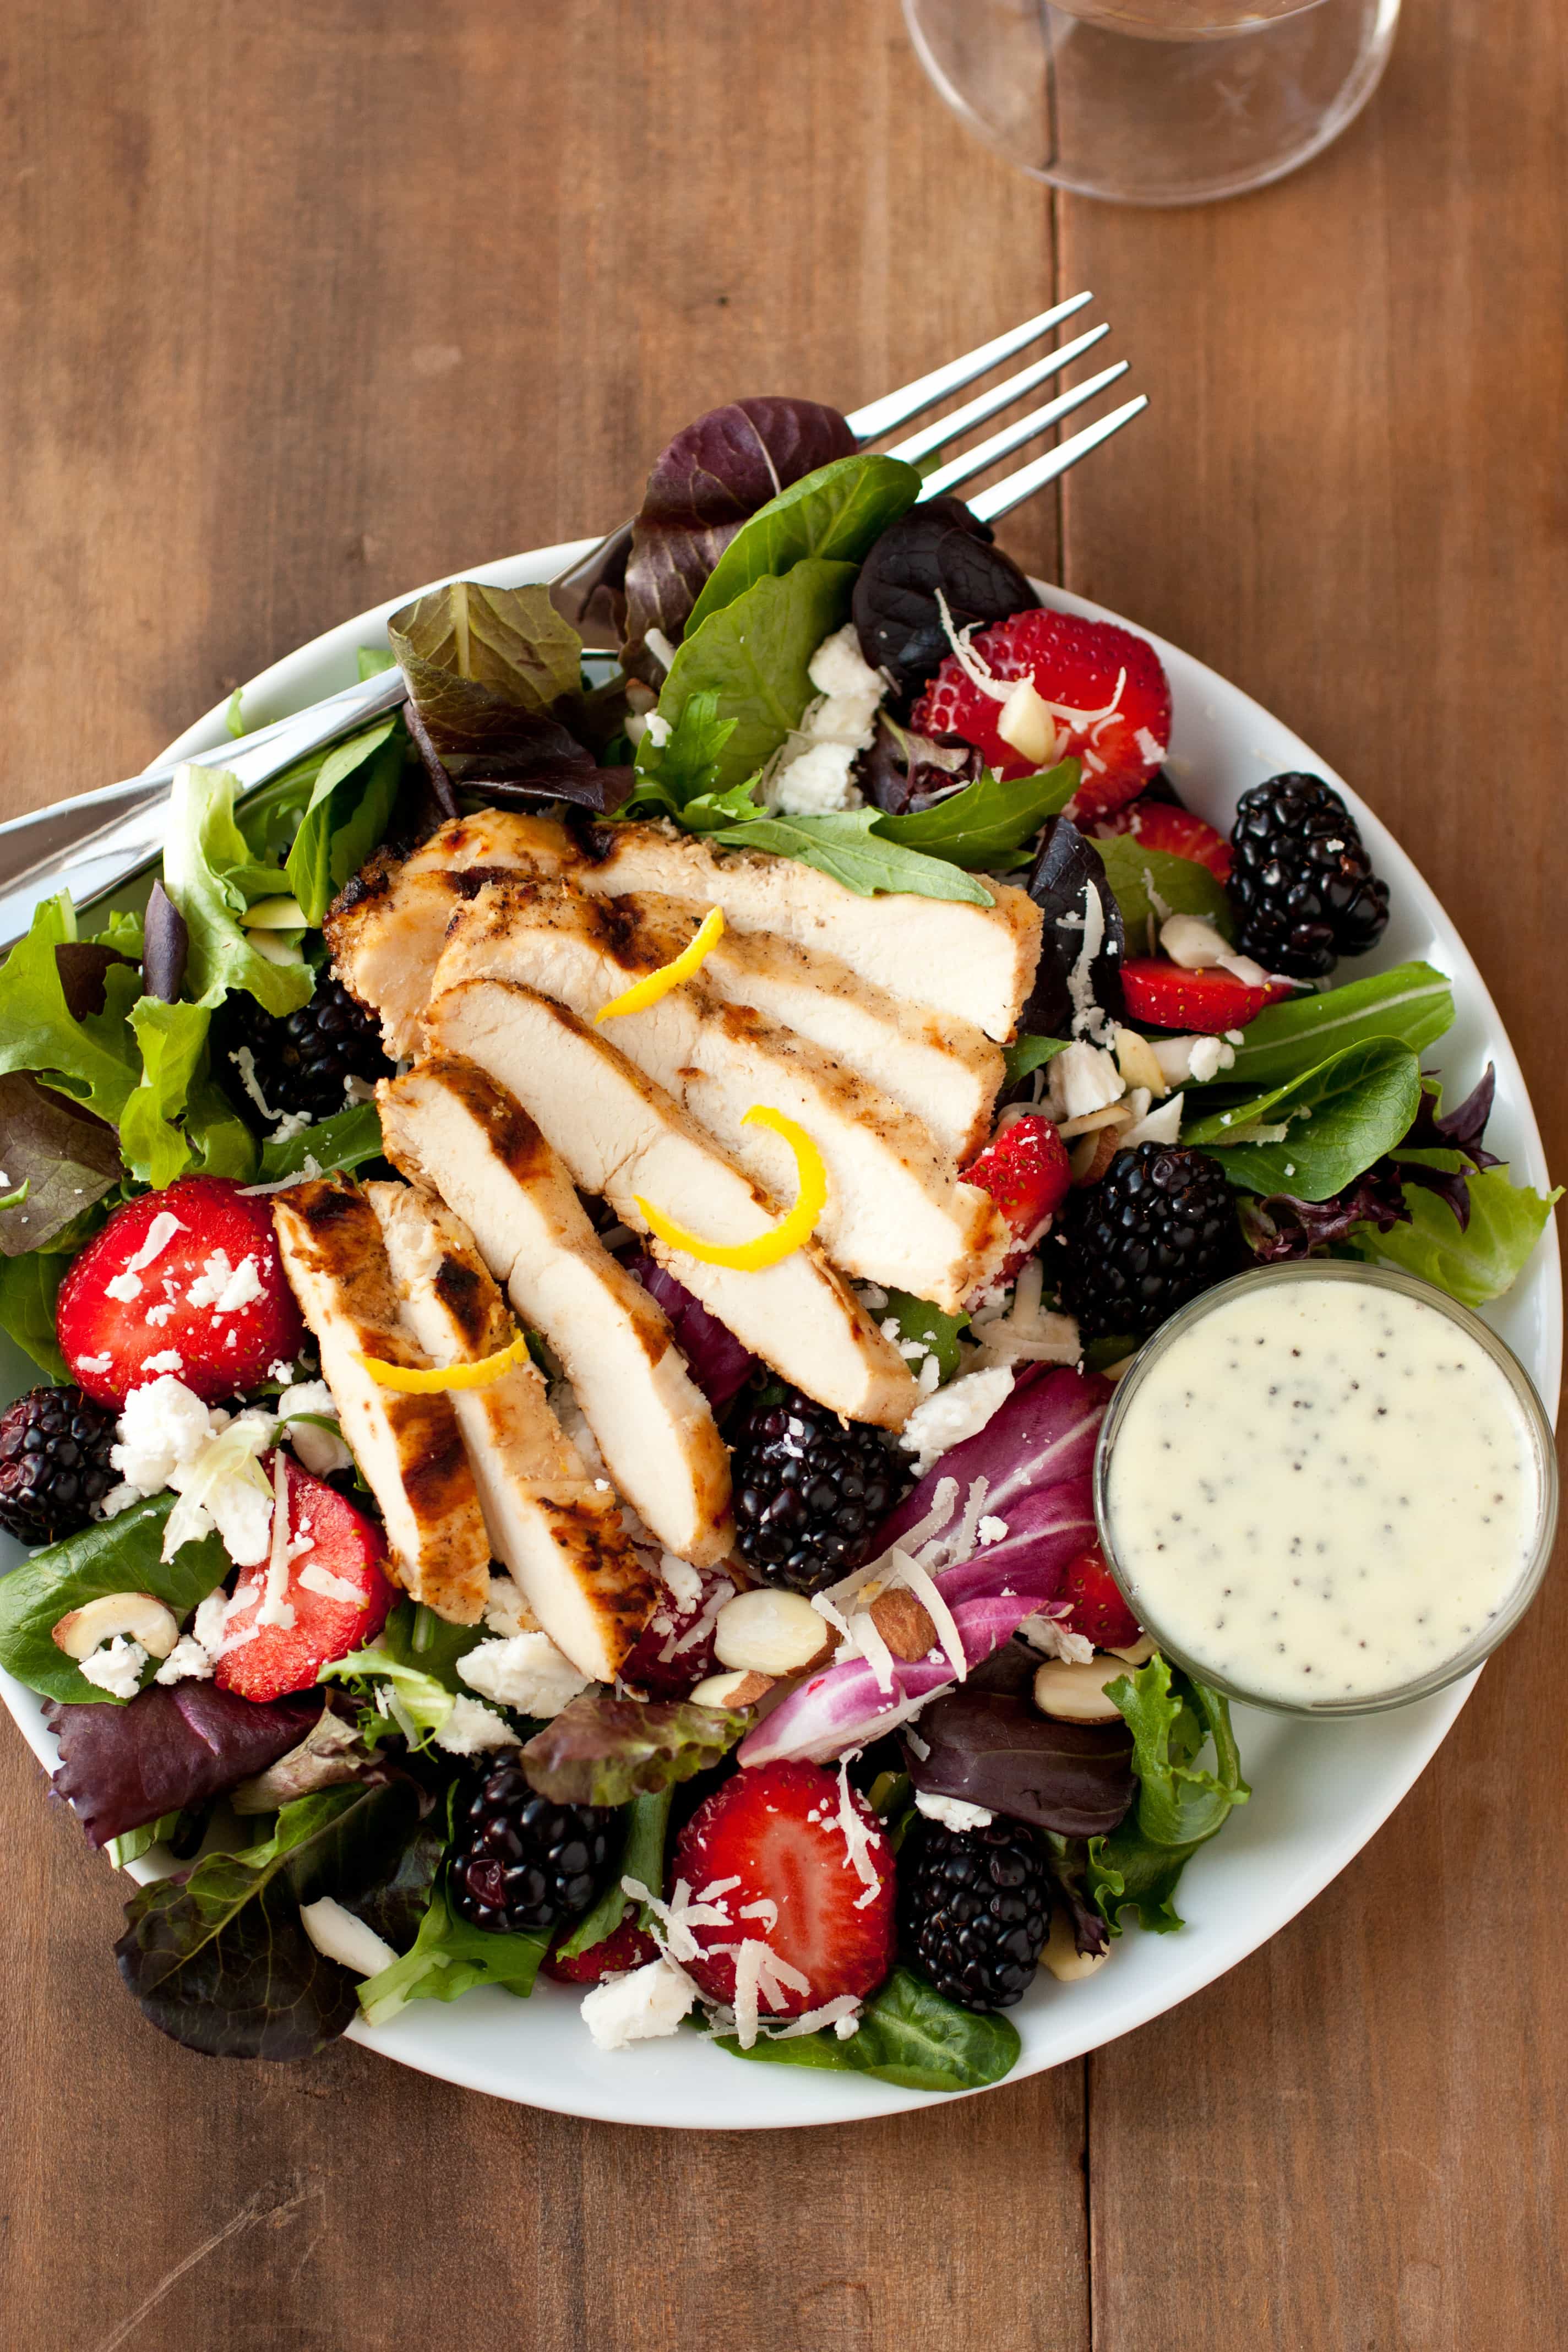 Salad with Berries, Grilled Lemon Chicken, Feta and Homemade Poppy Seed